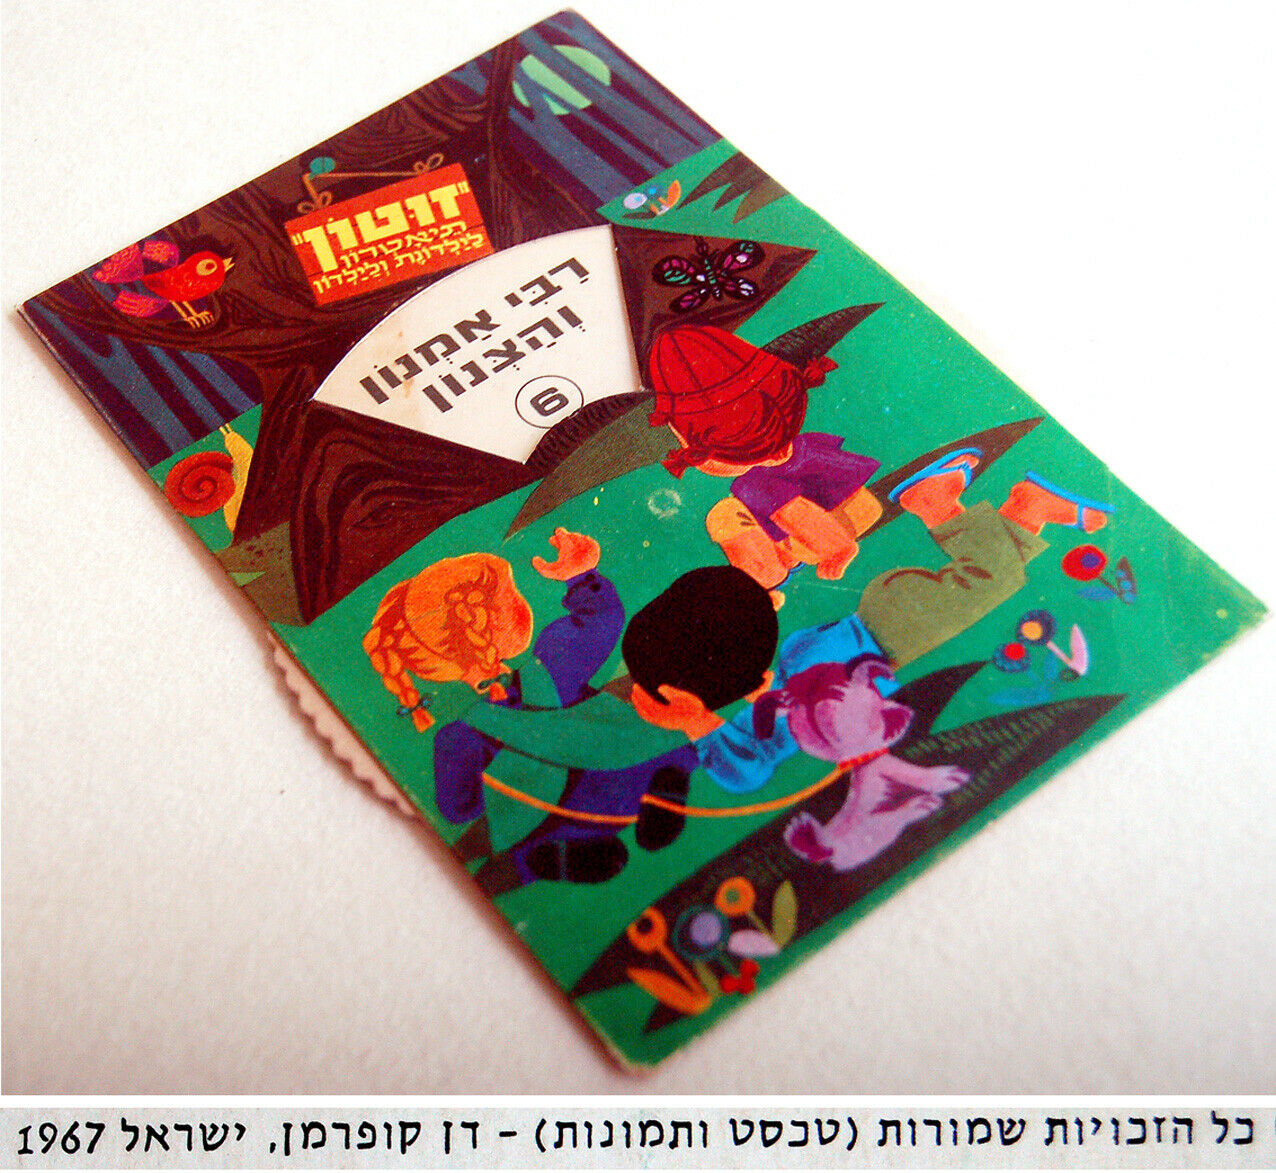 1967 Moveable Circular Rotated Children Hebrew Theatre Dial Rare Postcard Israel